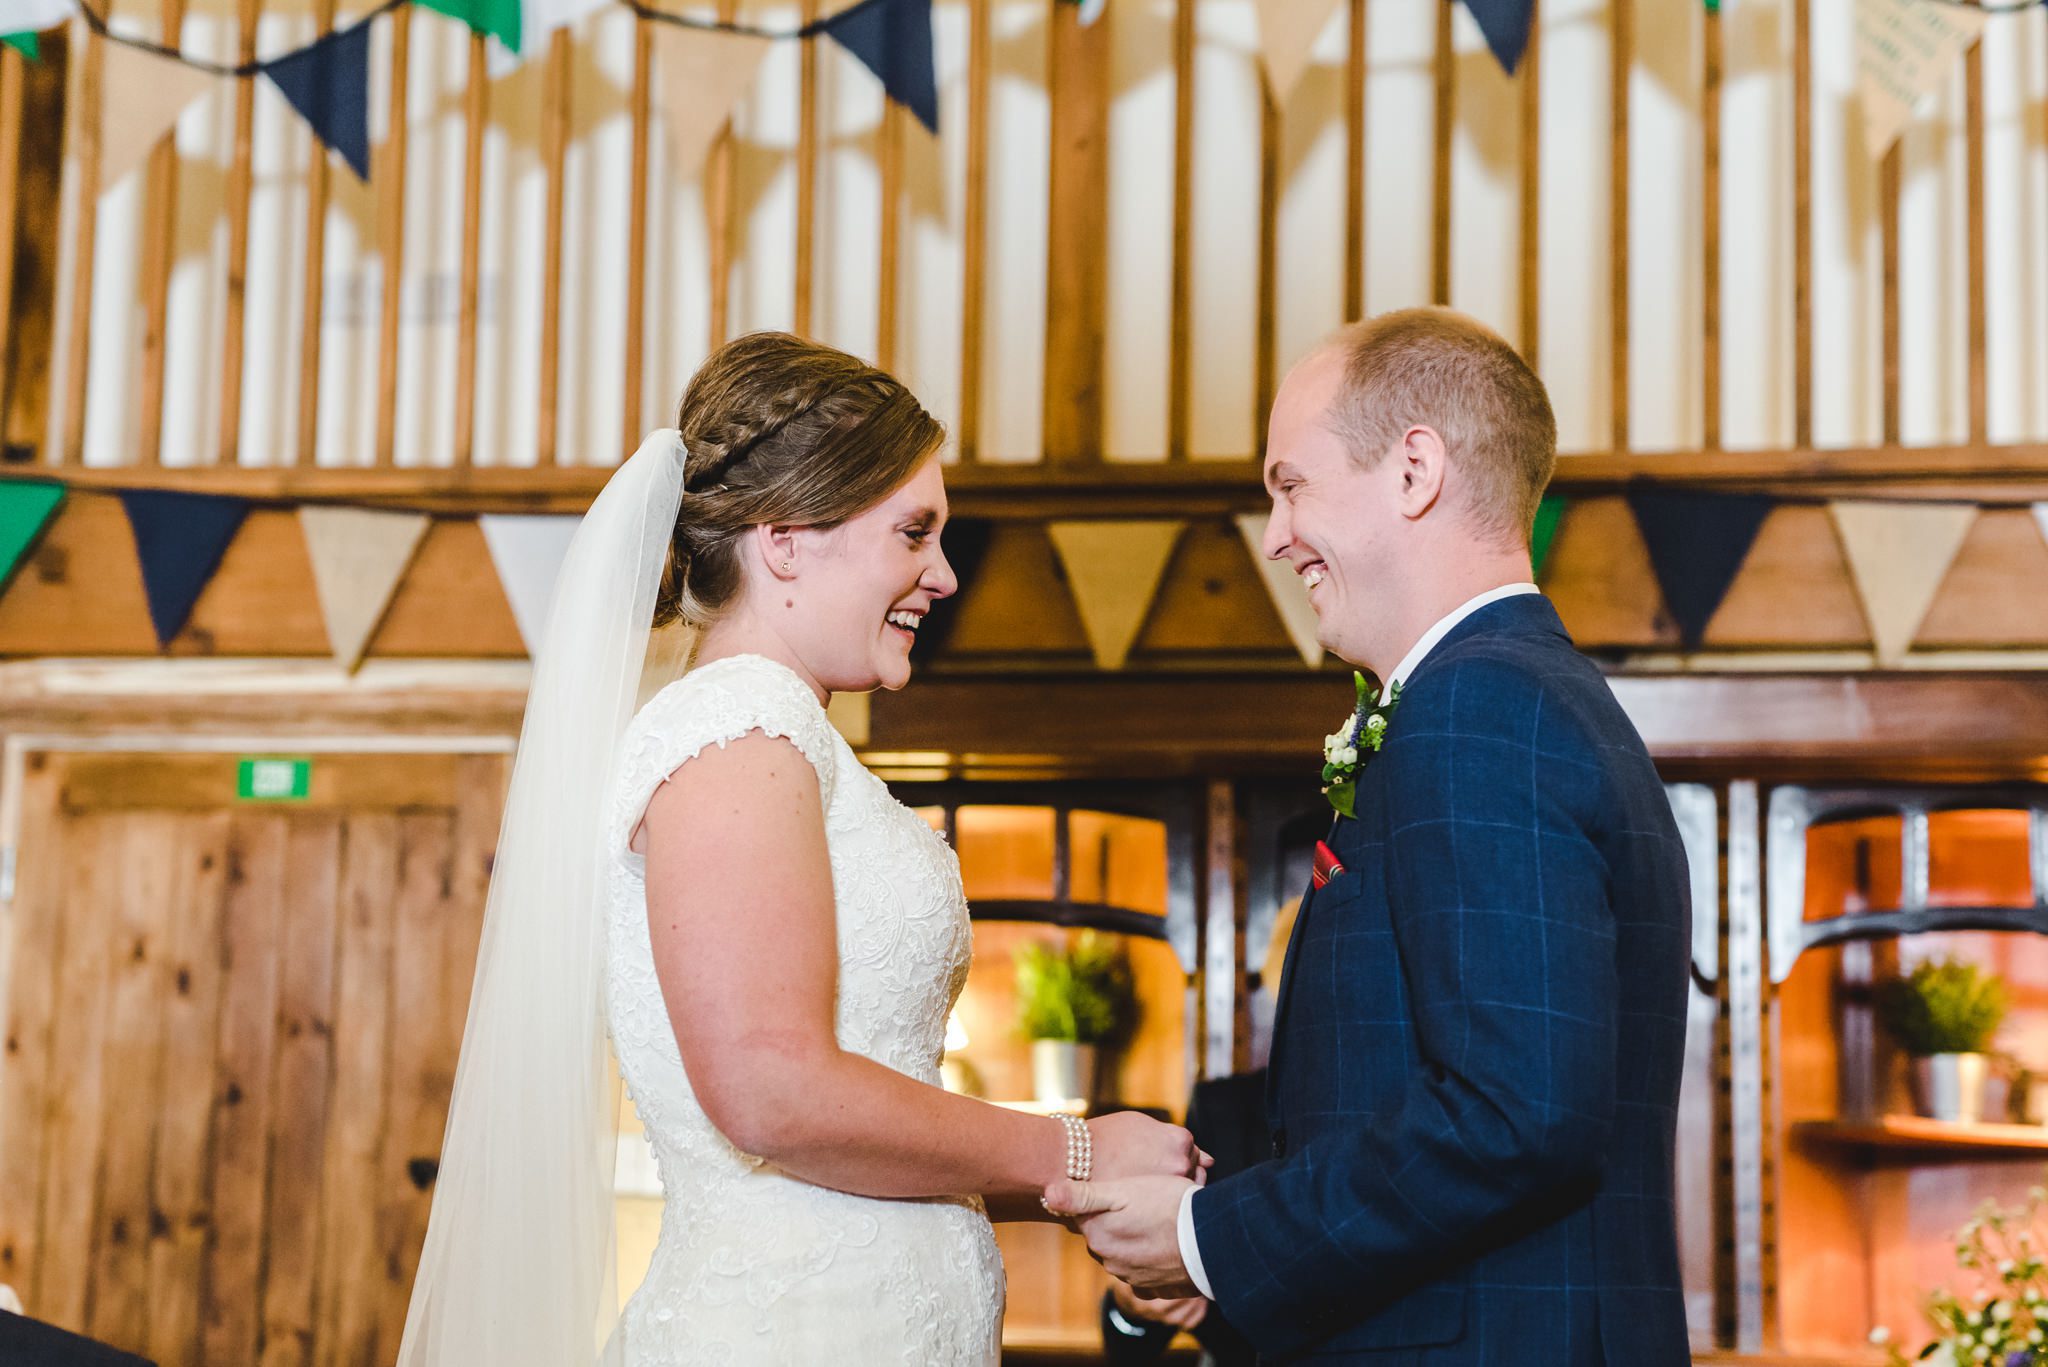 A bride and groom exchanging smiles and tears during their Owlpen Manor wedding ceremony